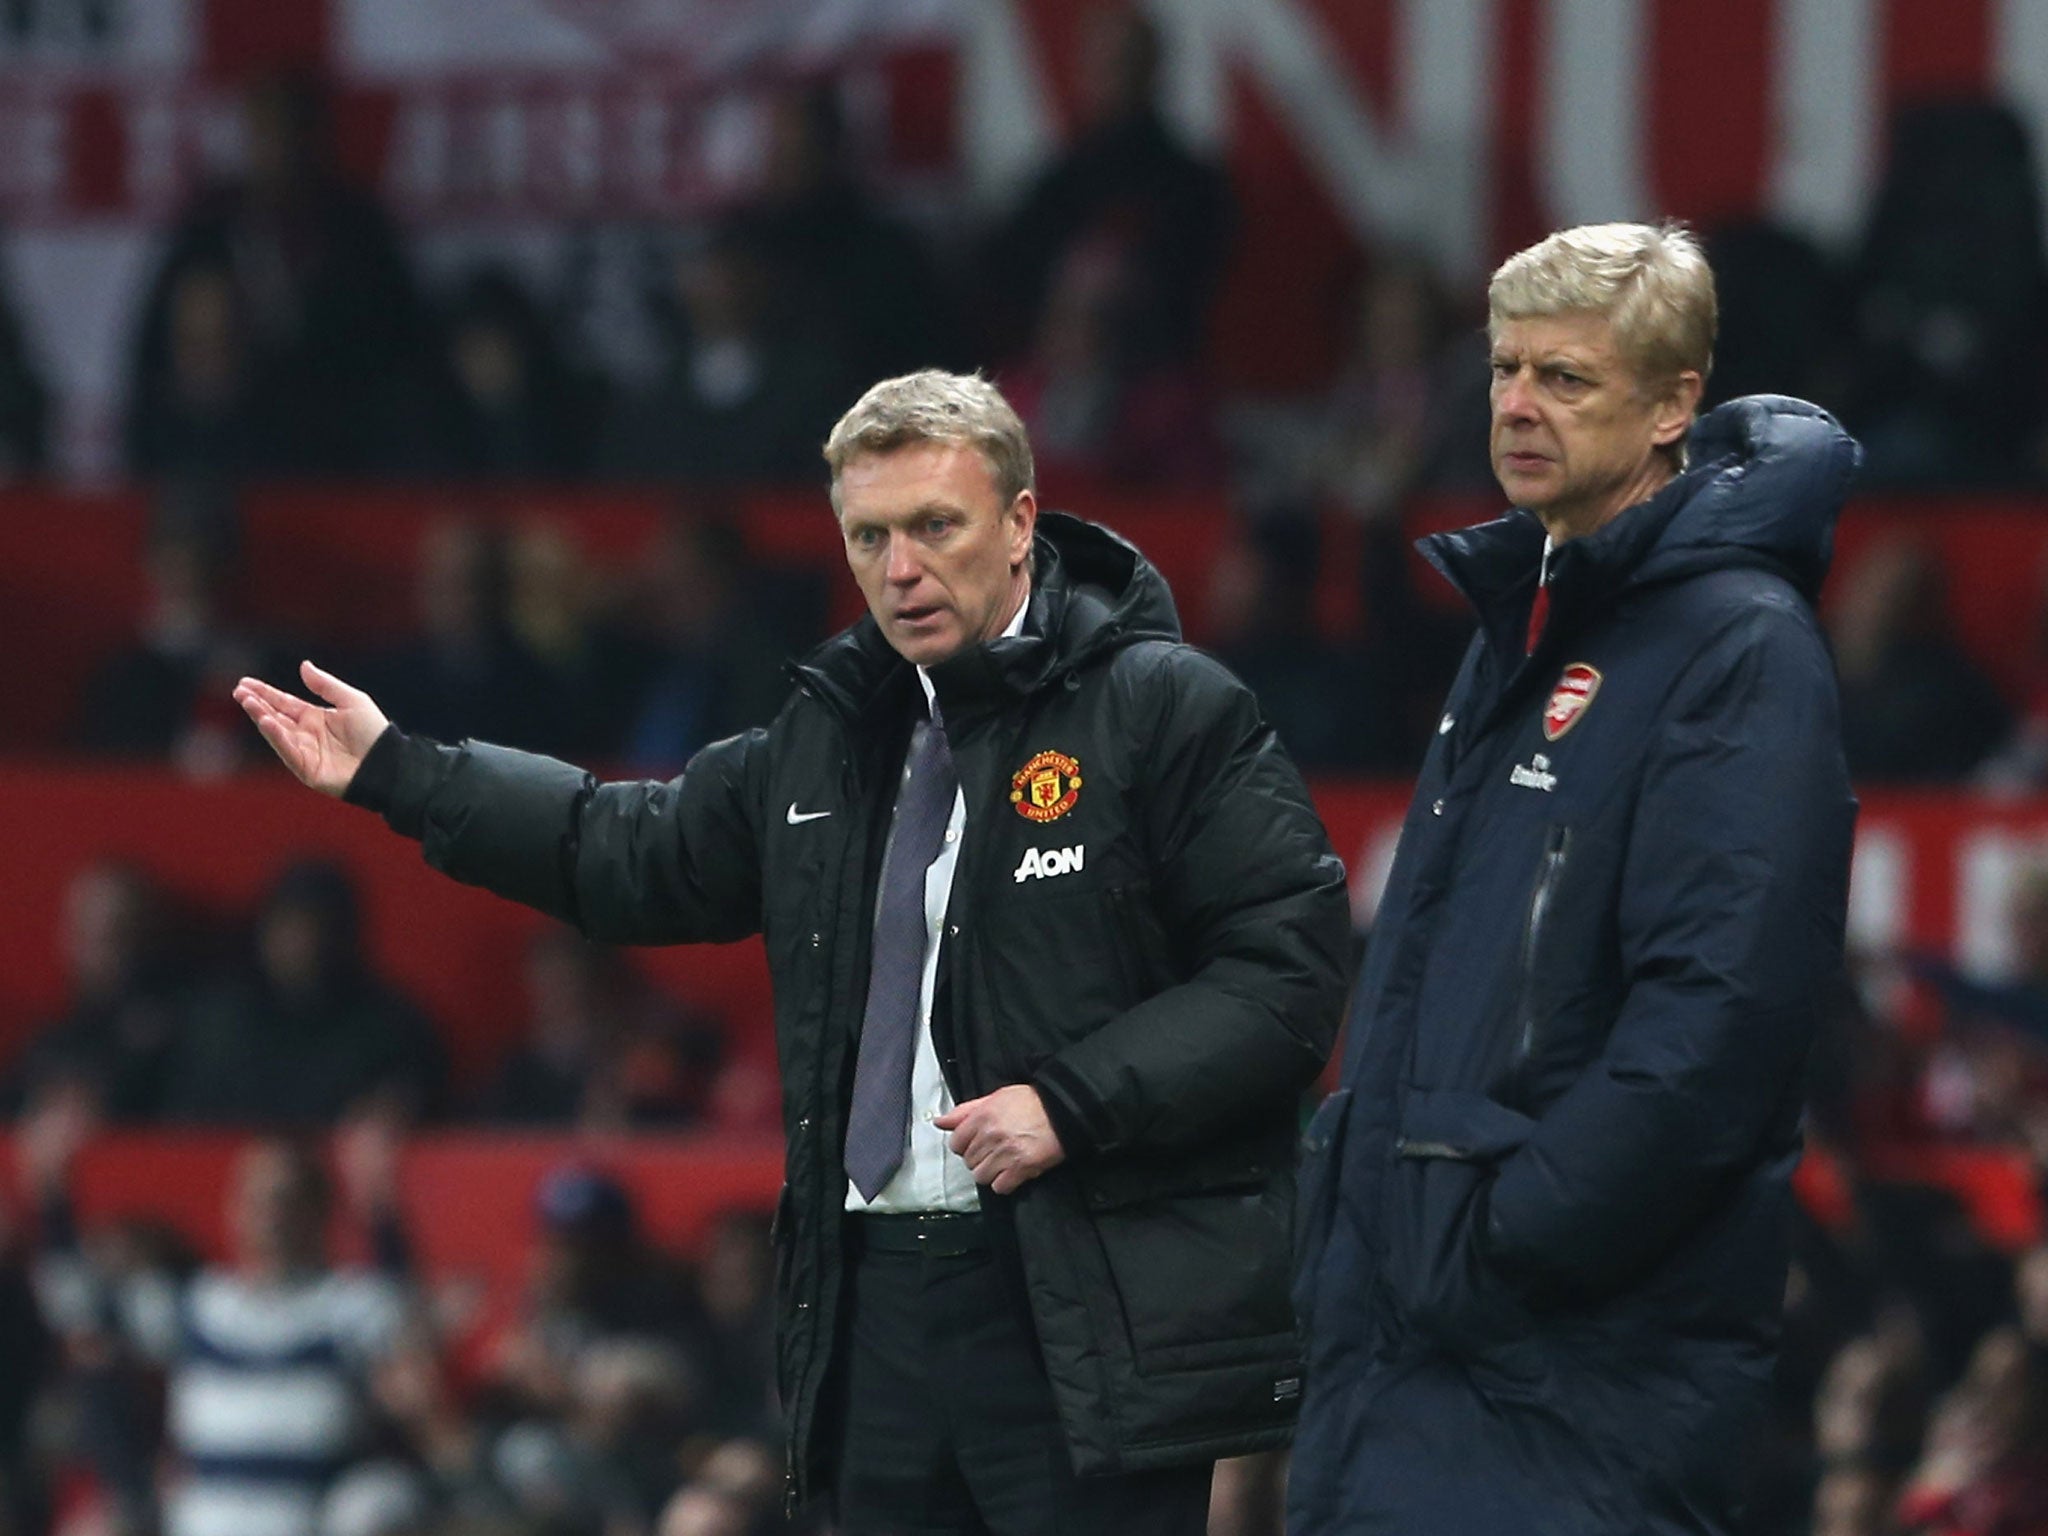 Both David Moyes and Arsene Wenger can't afford to lose their Premier League confrontation at the Emirates on Wednesday